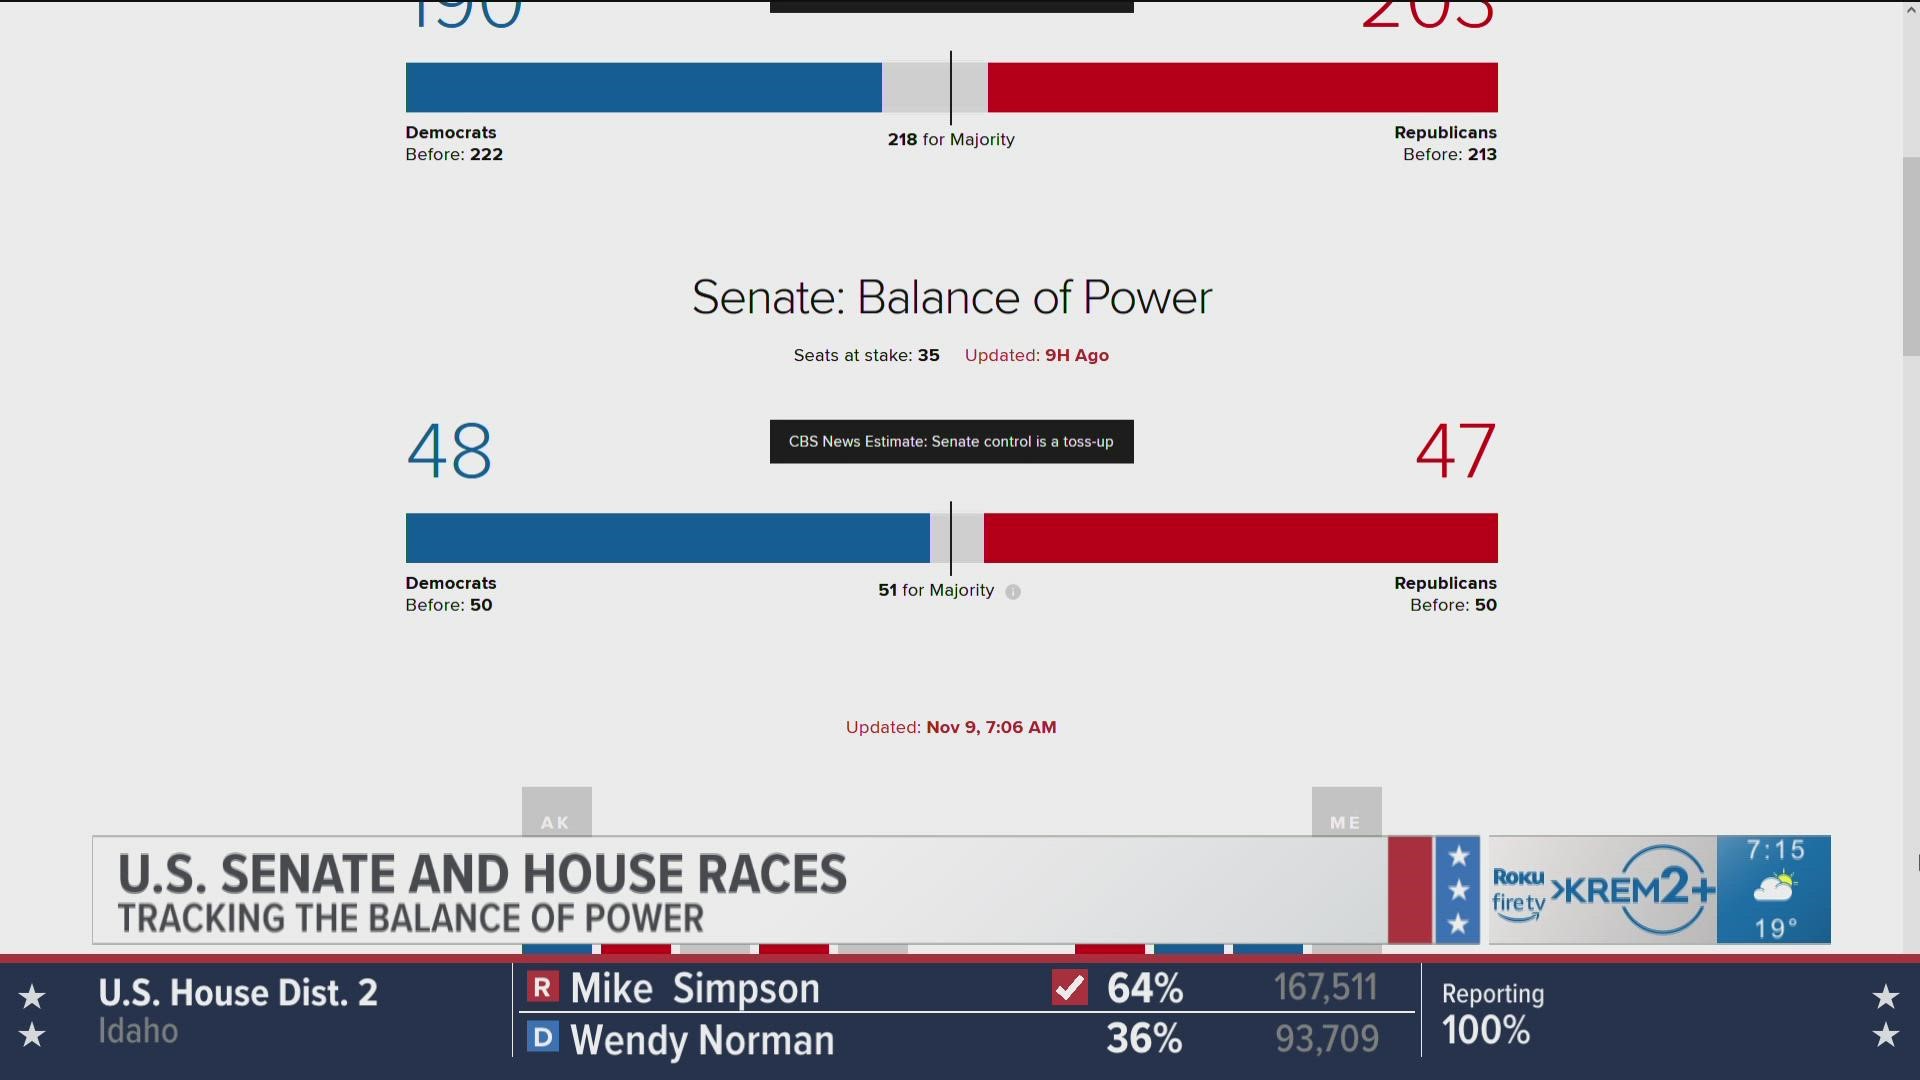 Tracking the Balance of Power in the U.S. Senate and House